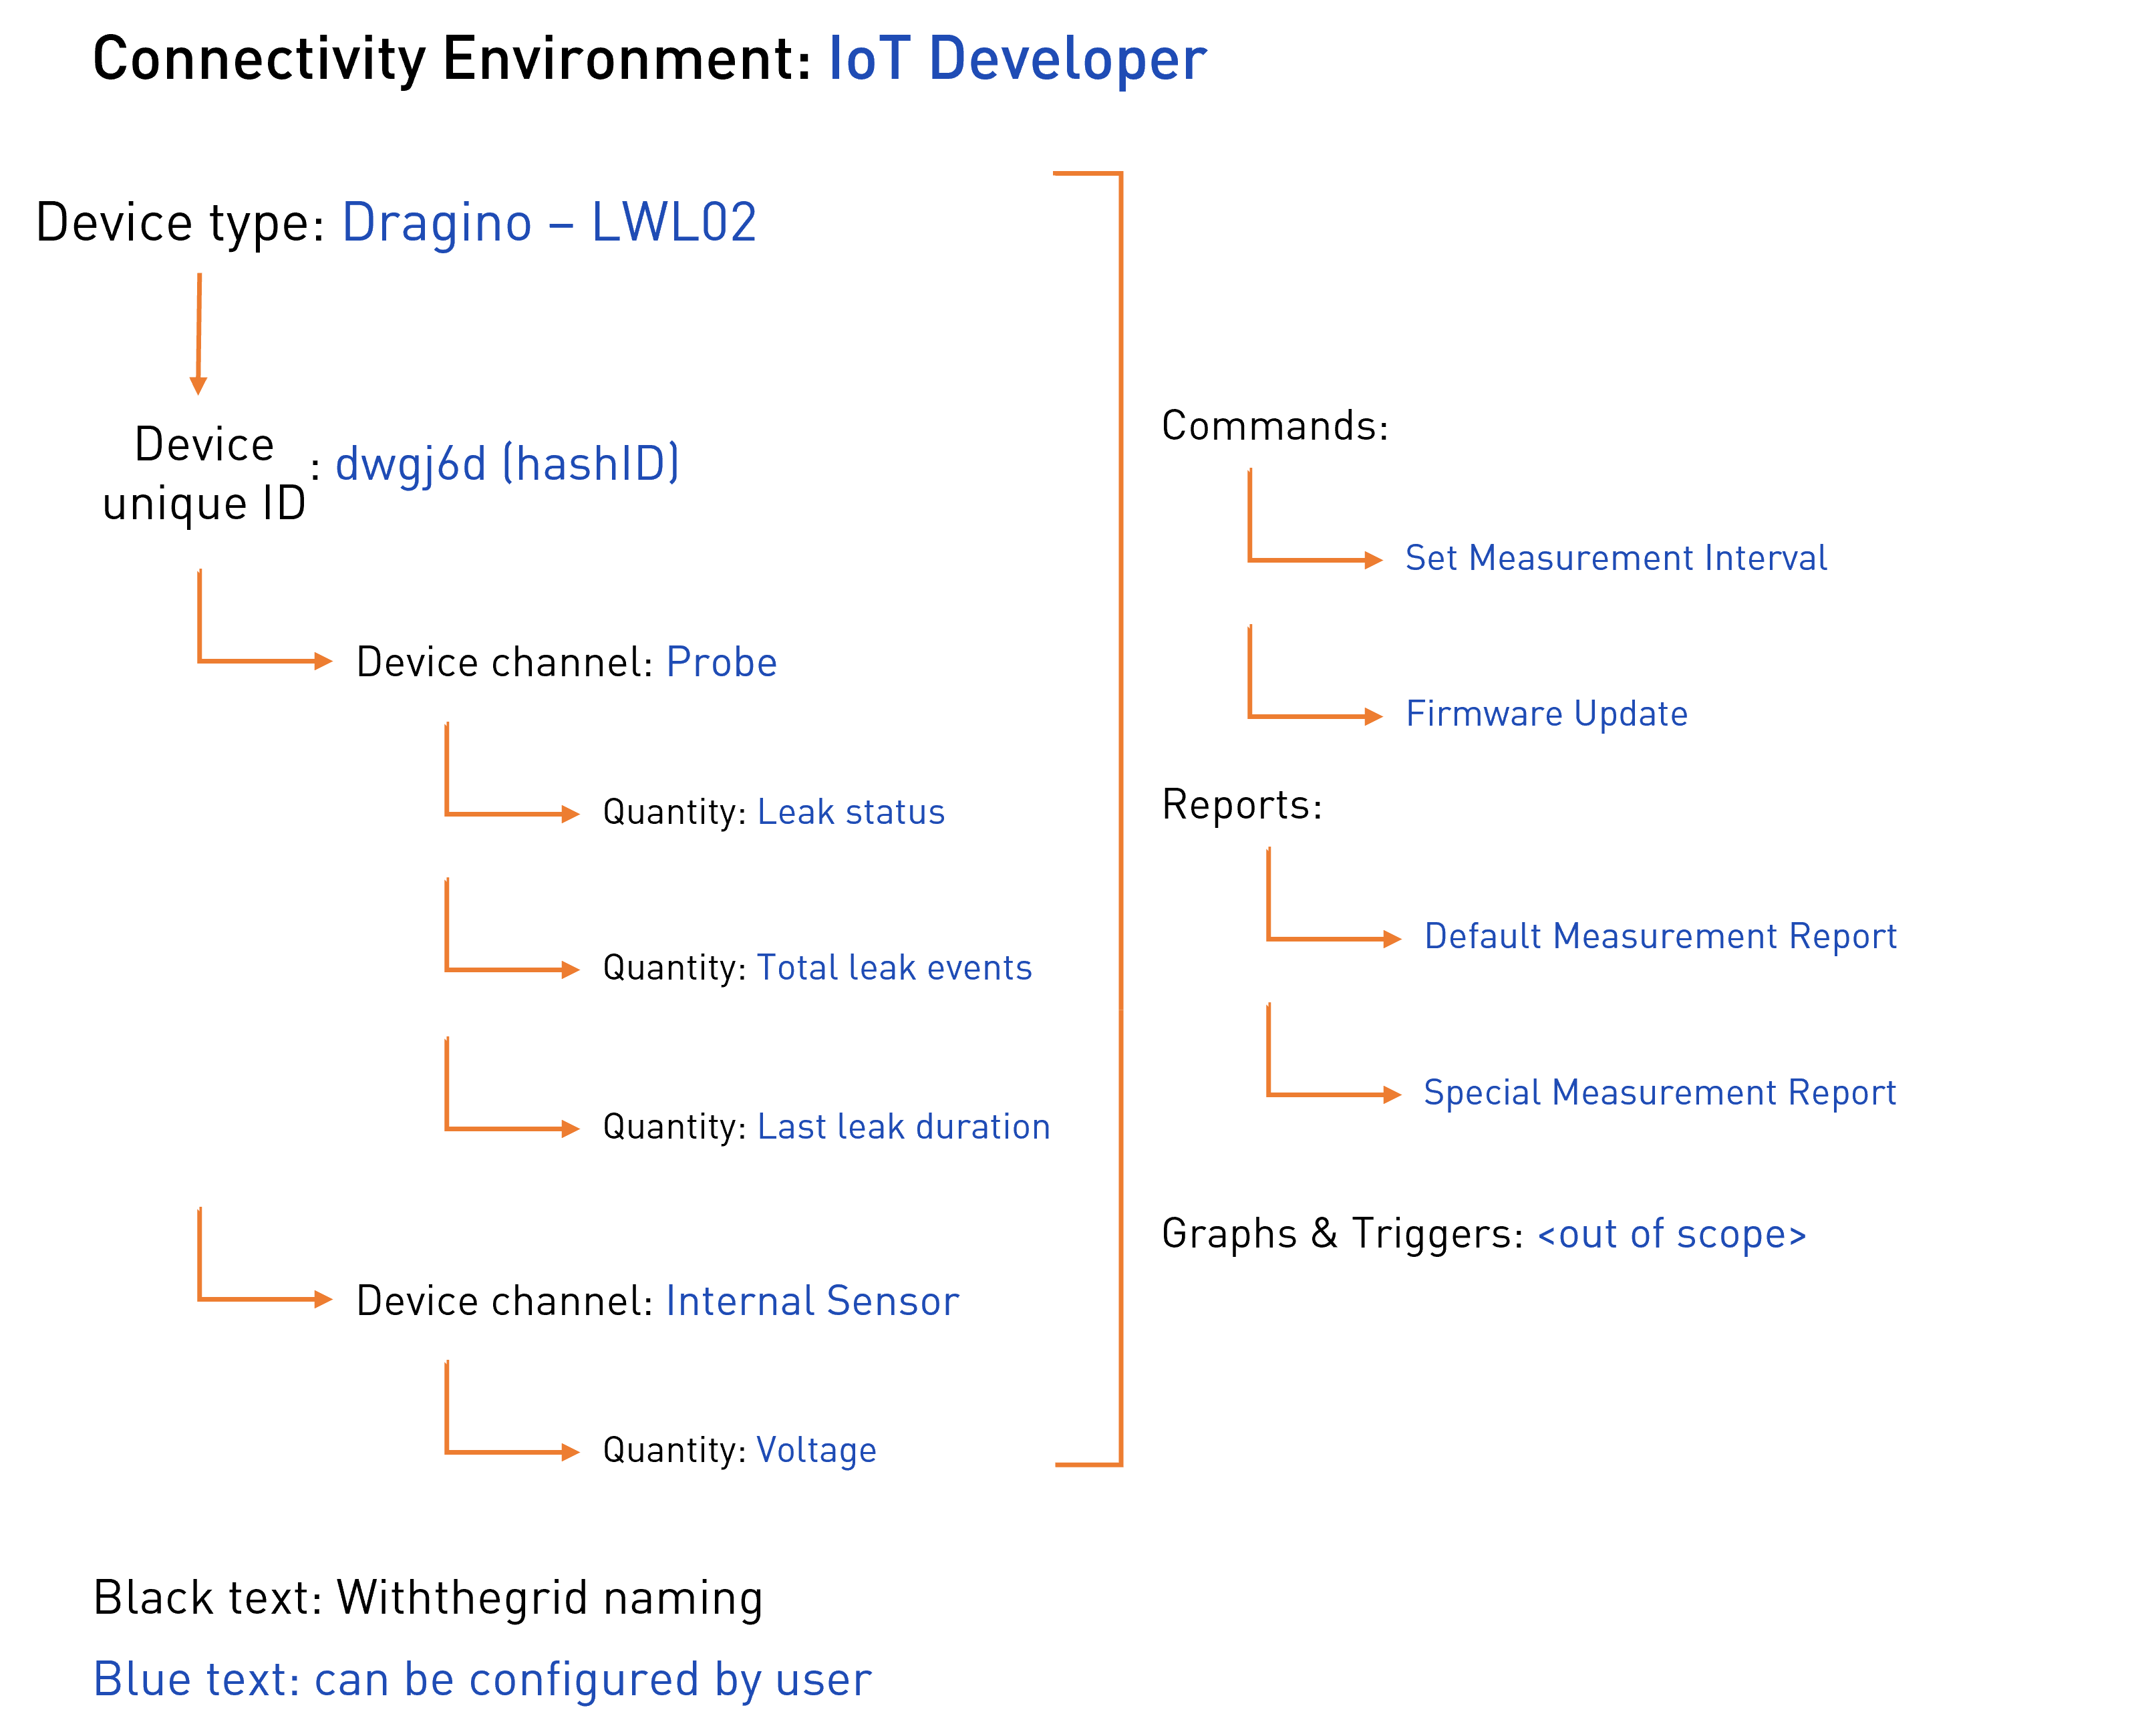 Connectivity environment example